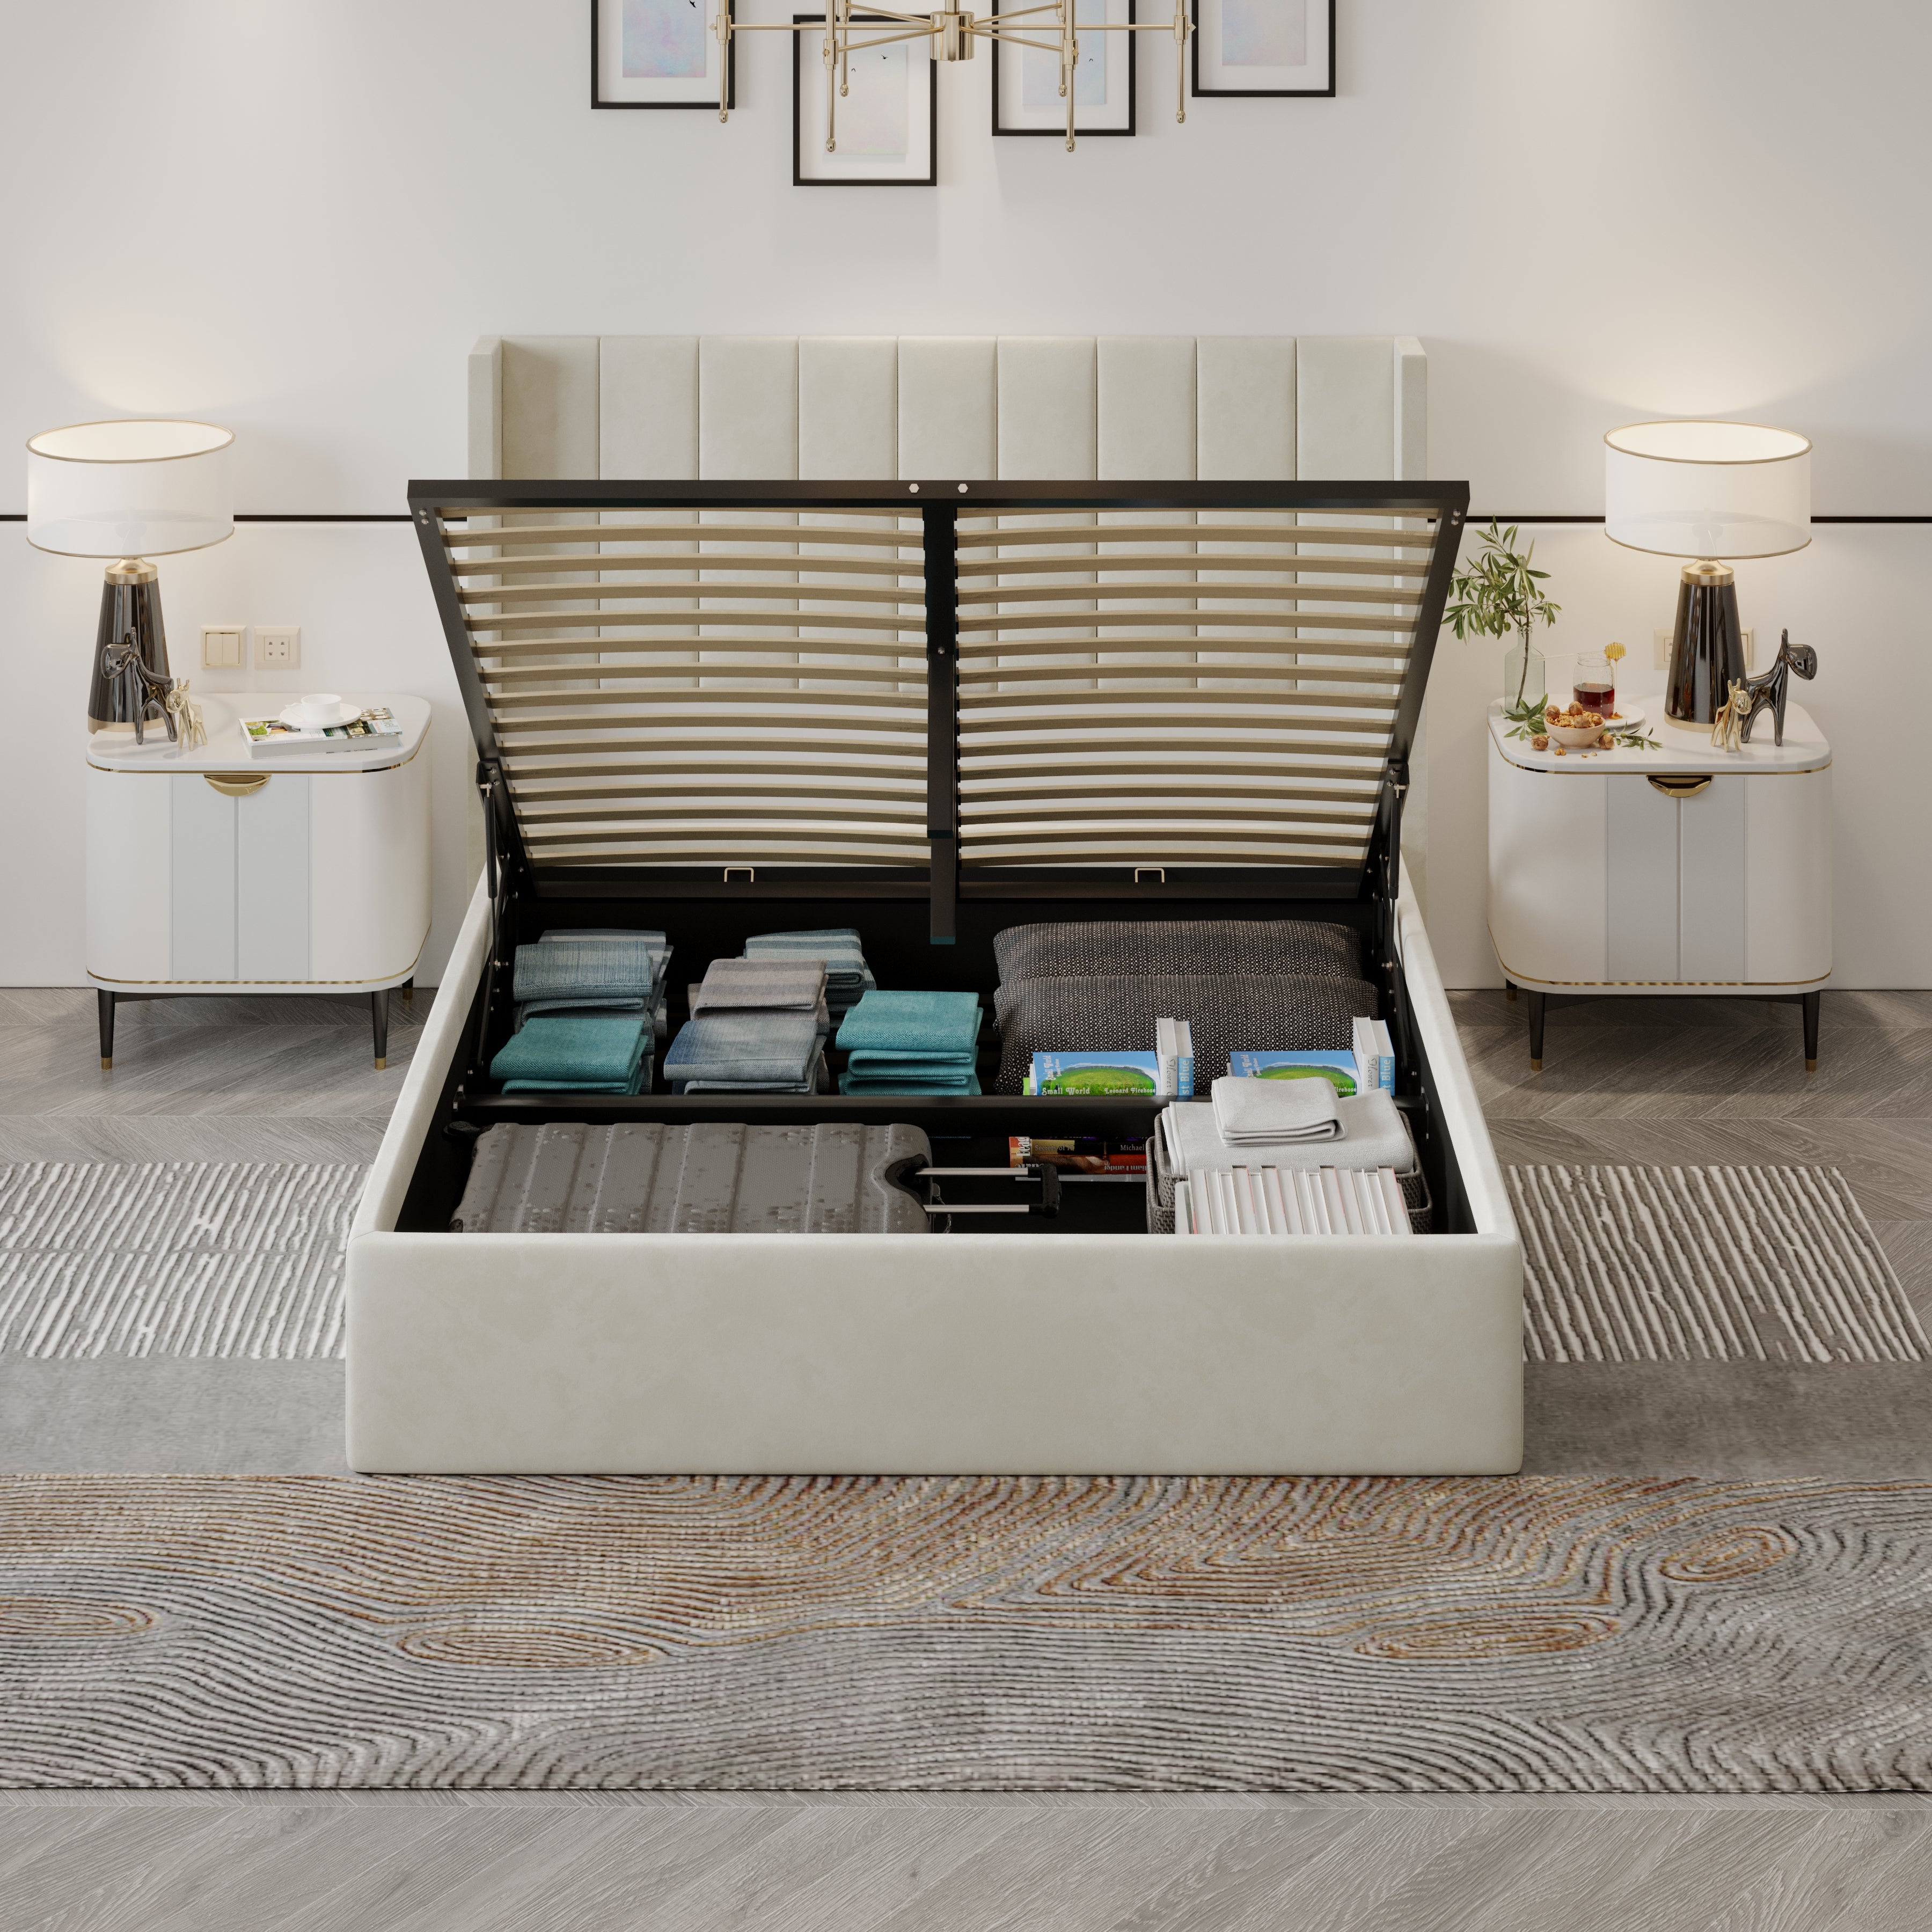 Velets Oliver Contemporary Mid-Century Soft Padded Upholstered Platform Storage Bed with Hydraulic Gas Lift Storage - Solid Wood Frame, Wood Slat System & Smart Hydraulic Under-Bed Storage -  Ivory